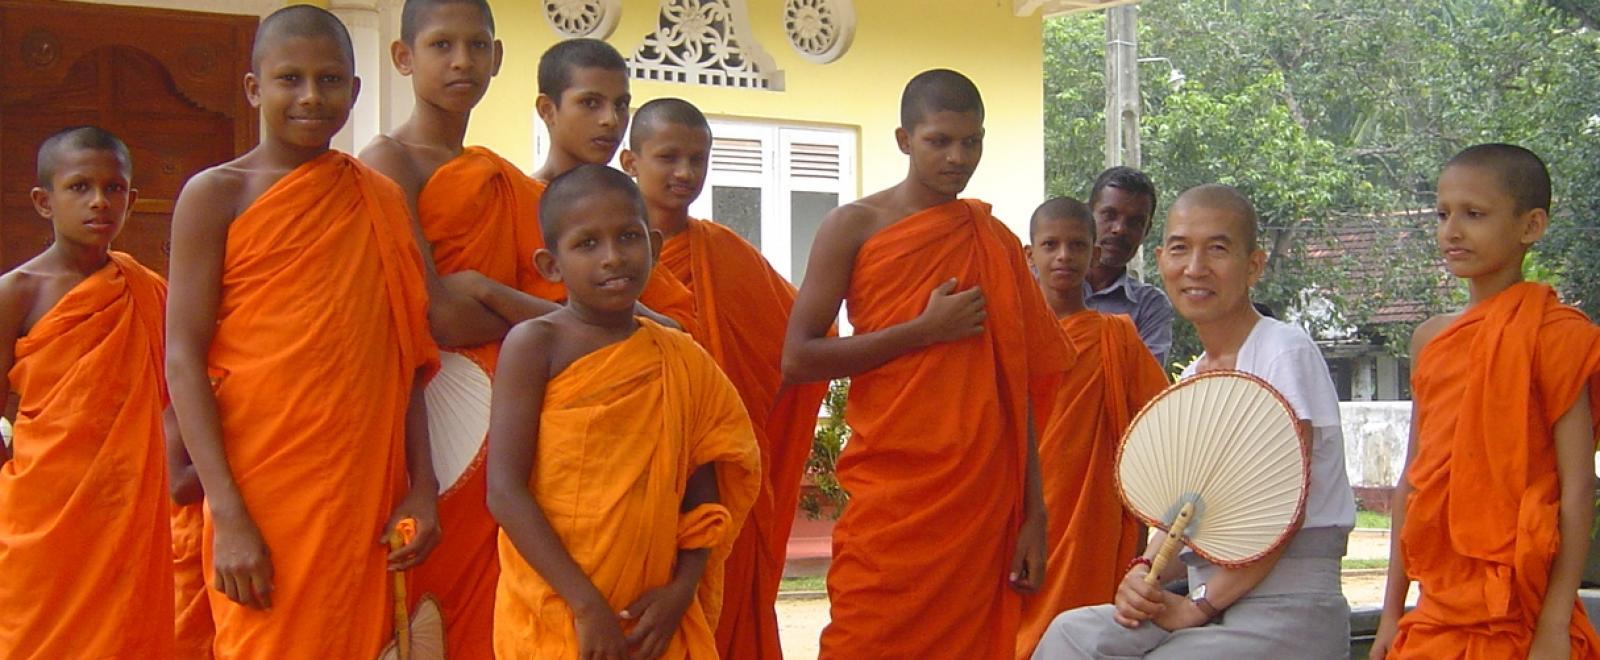 Young monks stand together near Sri Lanka volunteering opportunities with Projects Abroad.